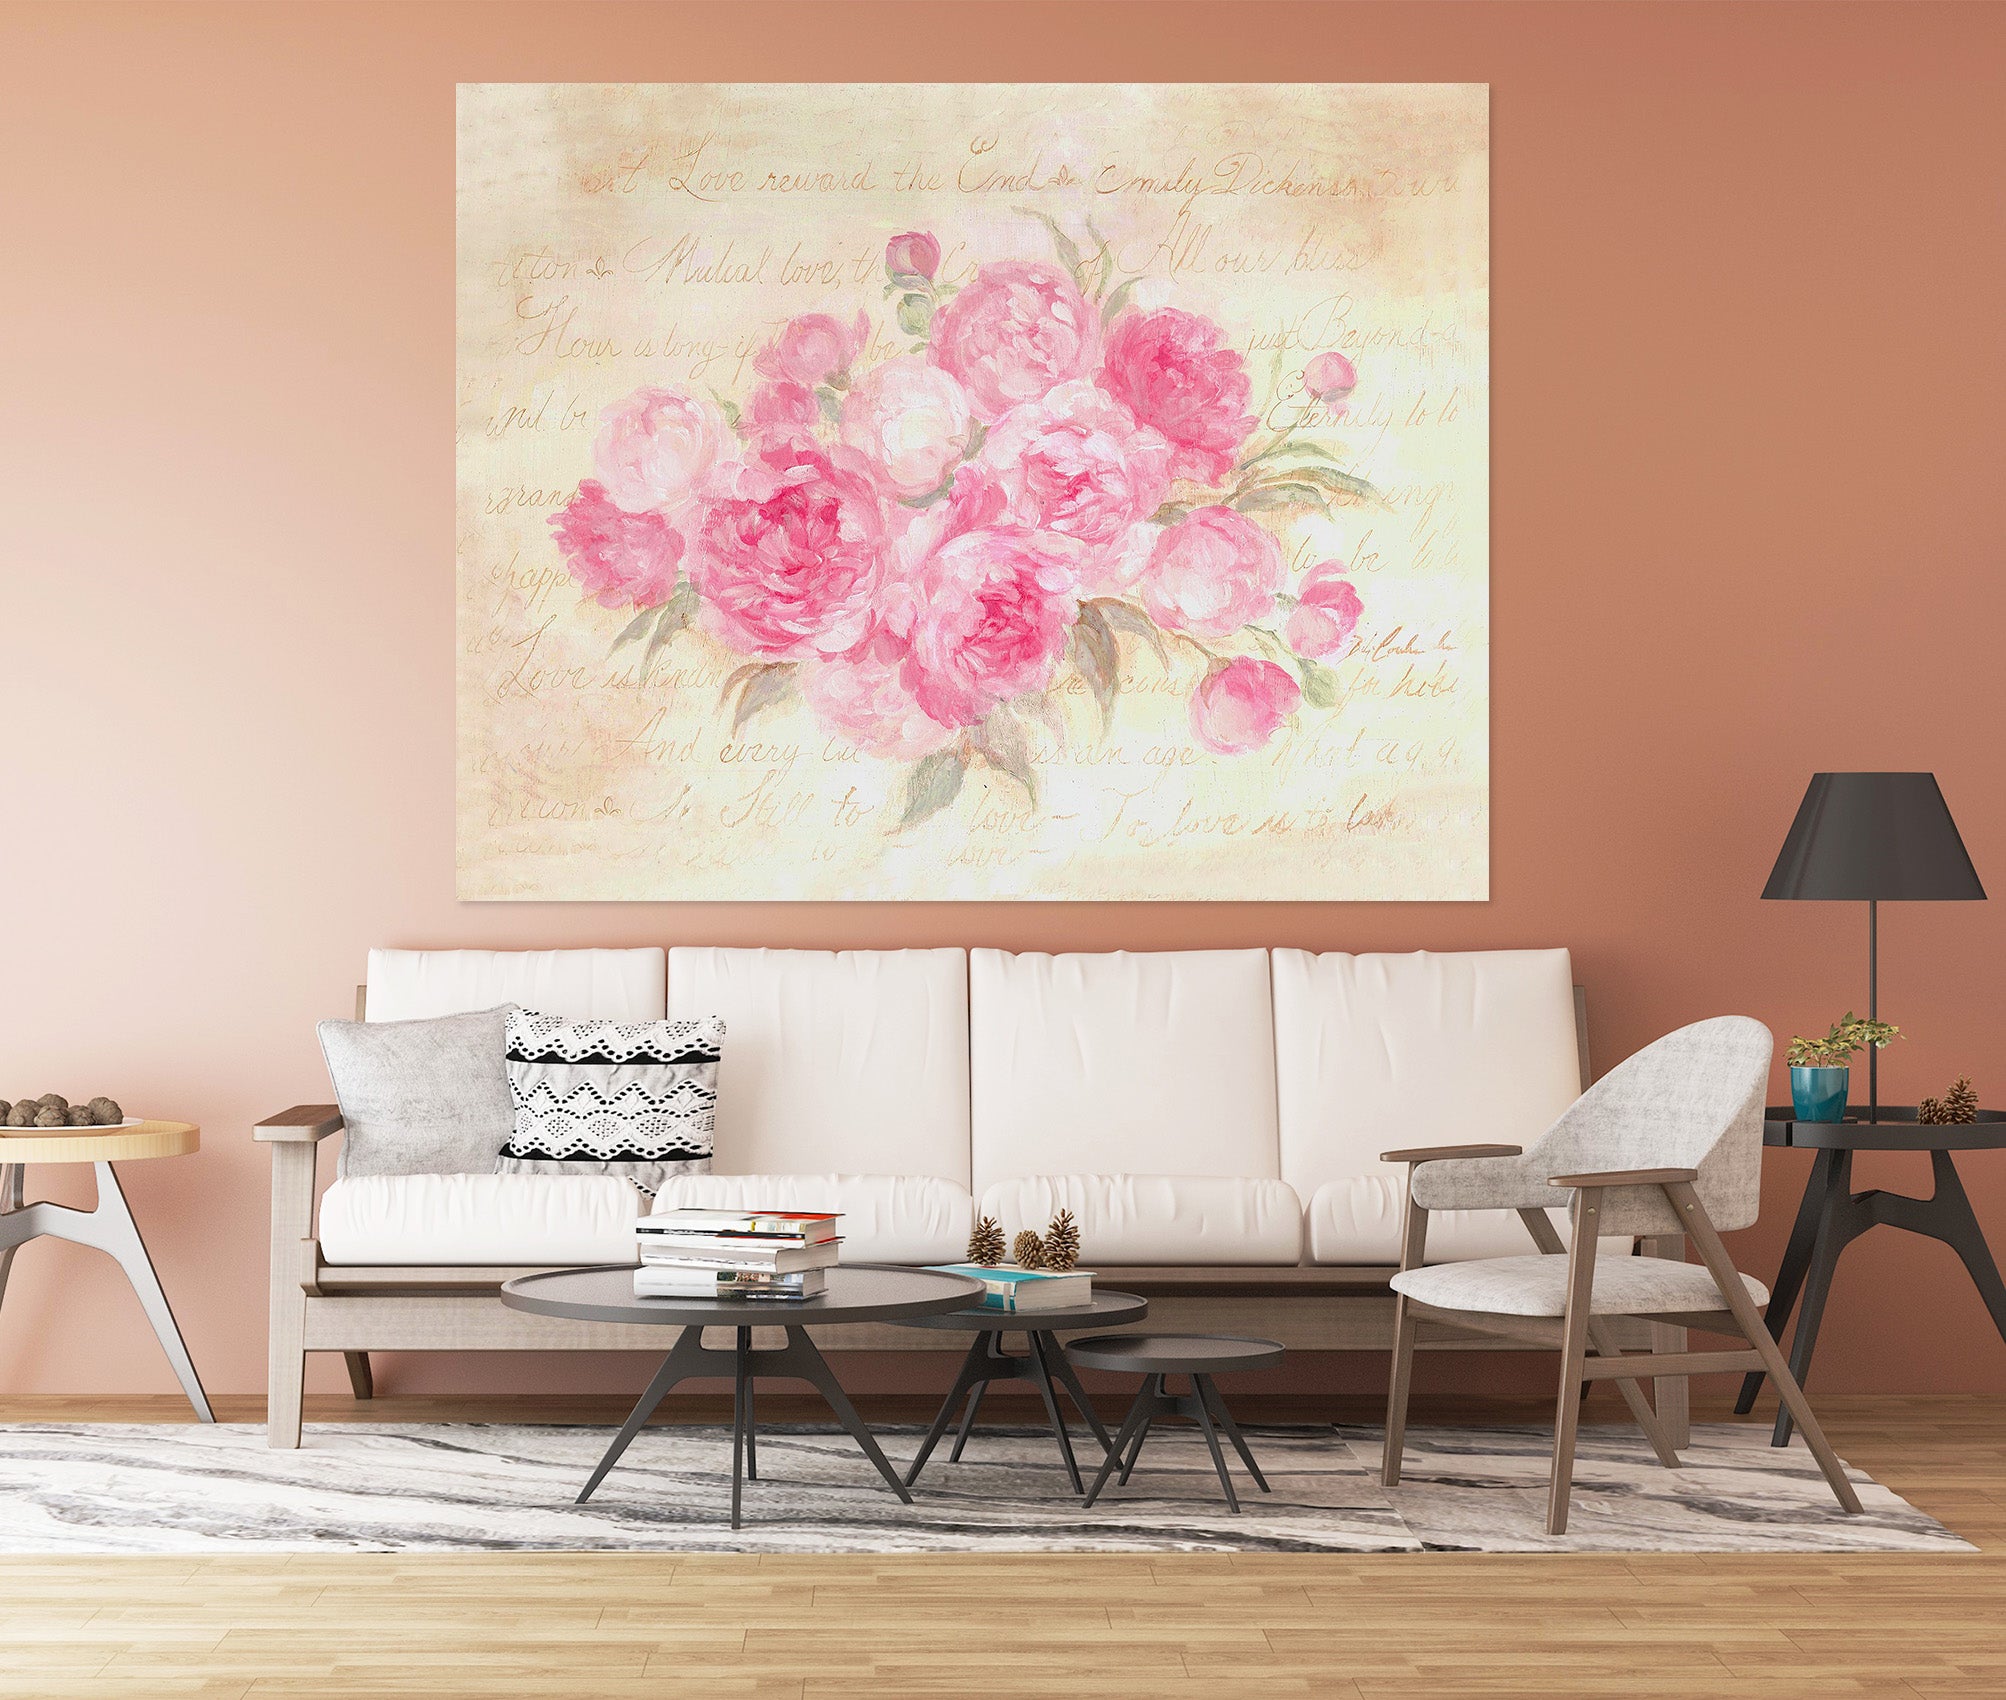 3D Pink Rose 026 Debi Coules Wall Sticker